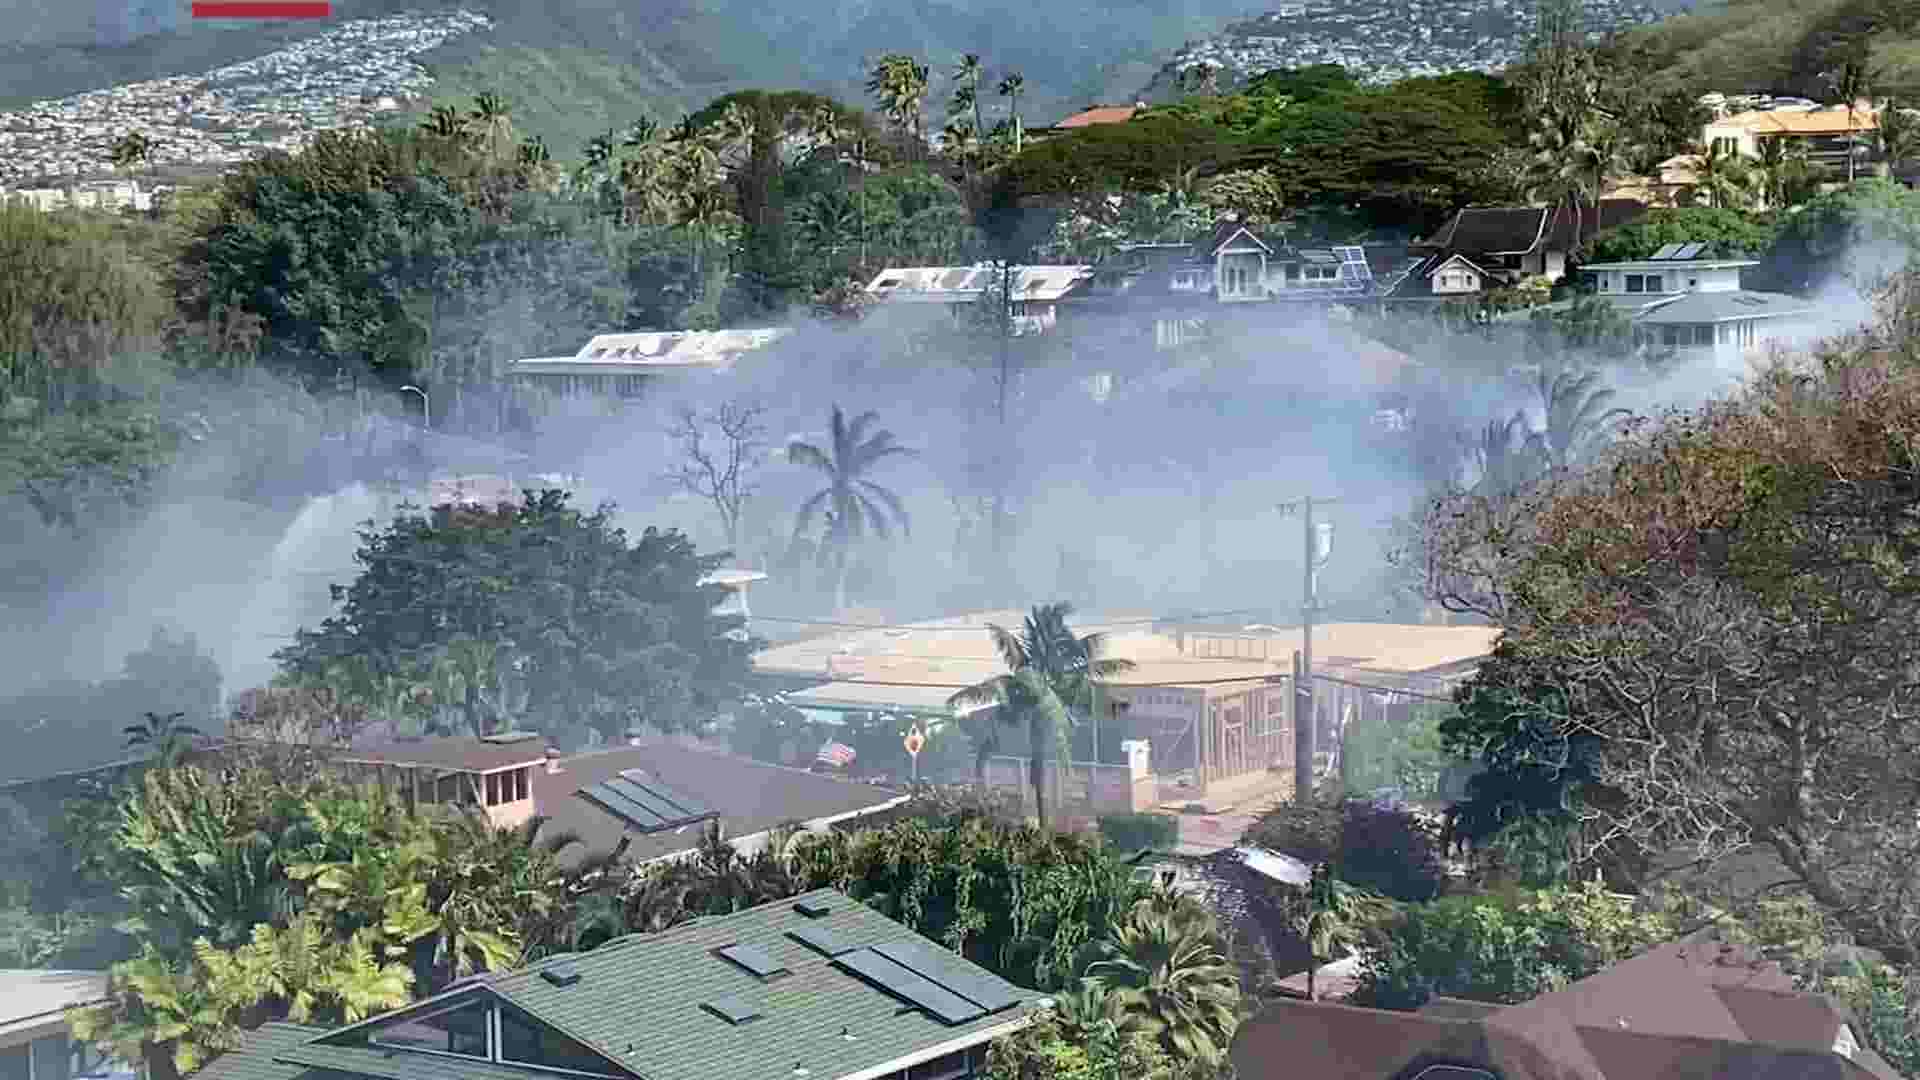 Two police officers killed in Hawaii shooting Sunday1920 x 1080